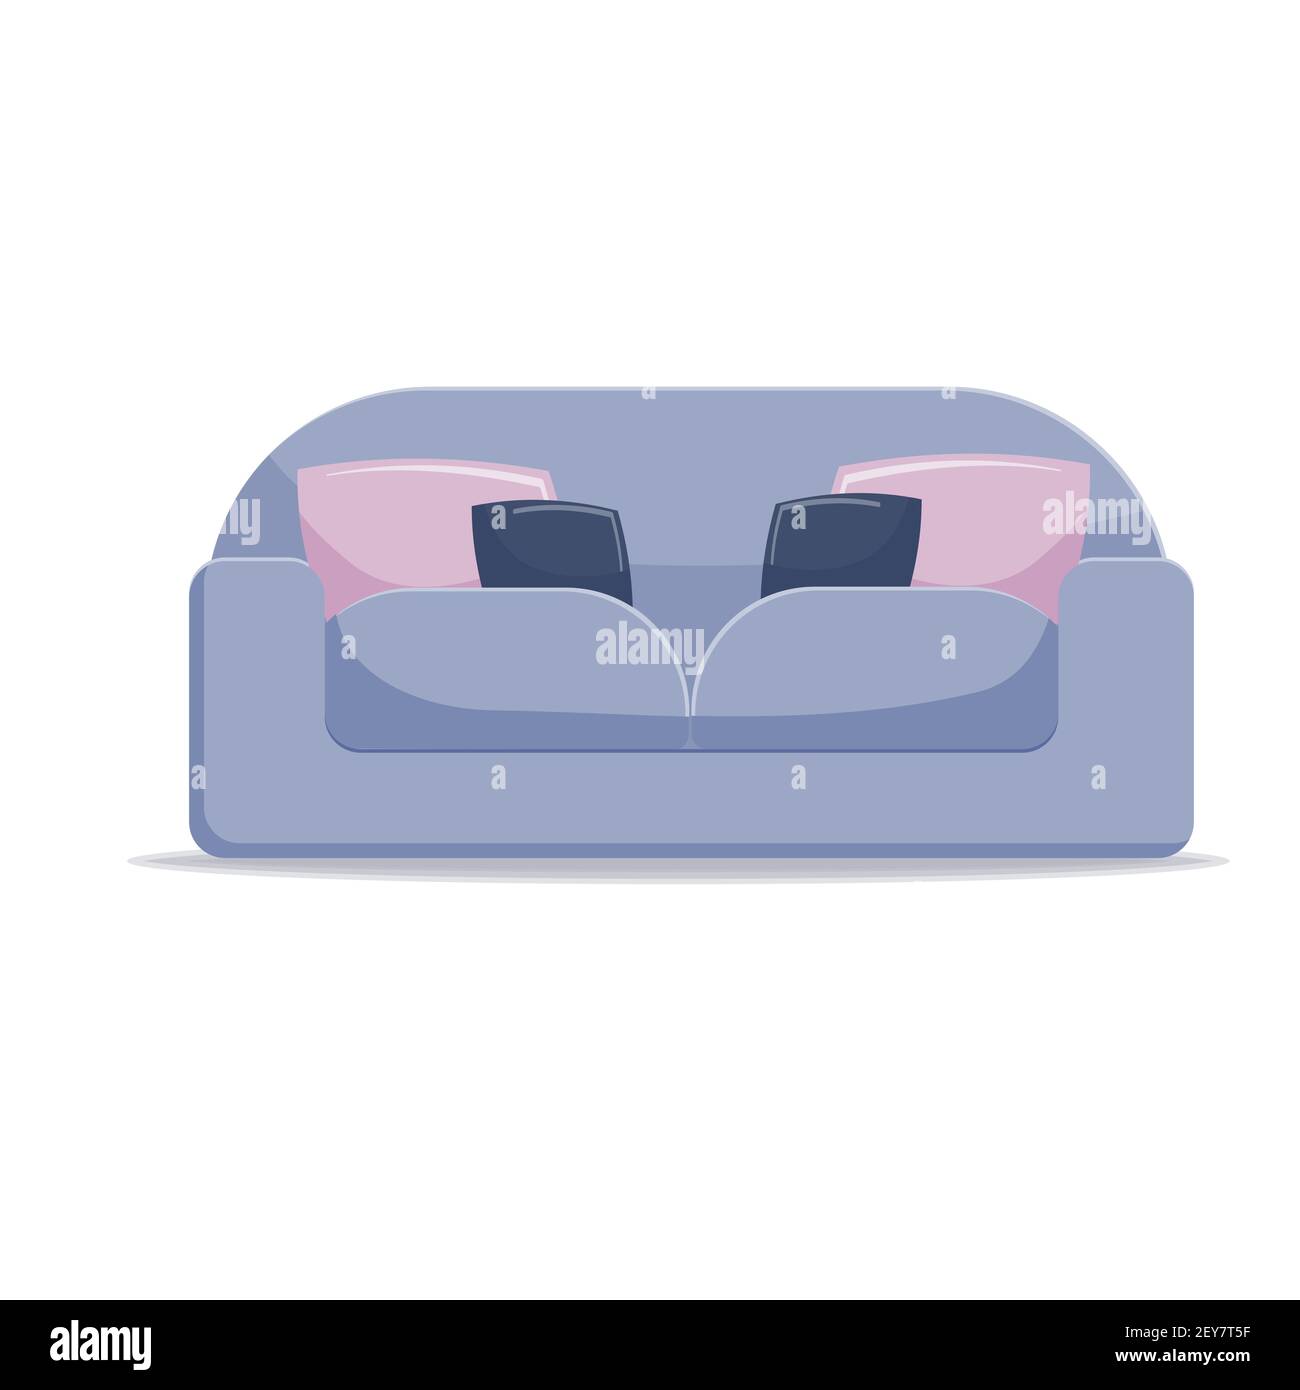 Sofa vector illustration isolated on white background. Stock Vector